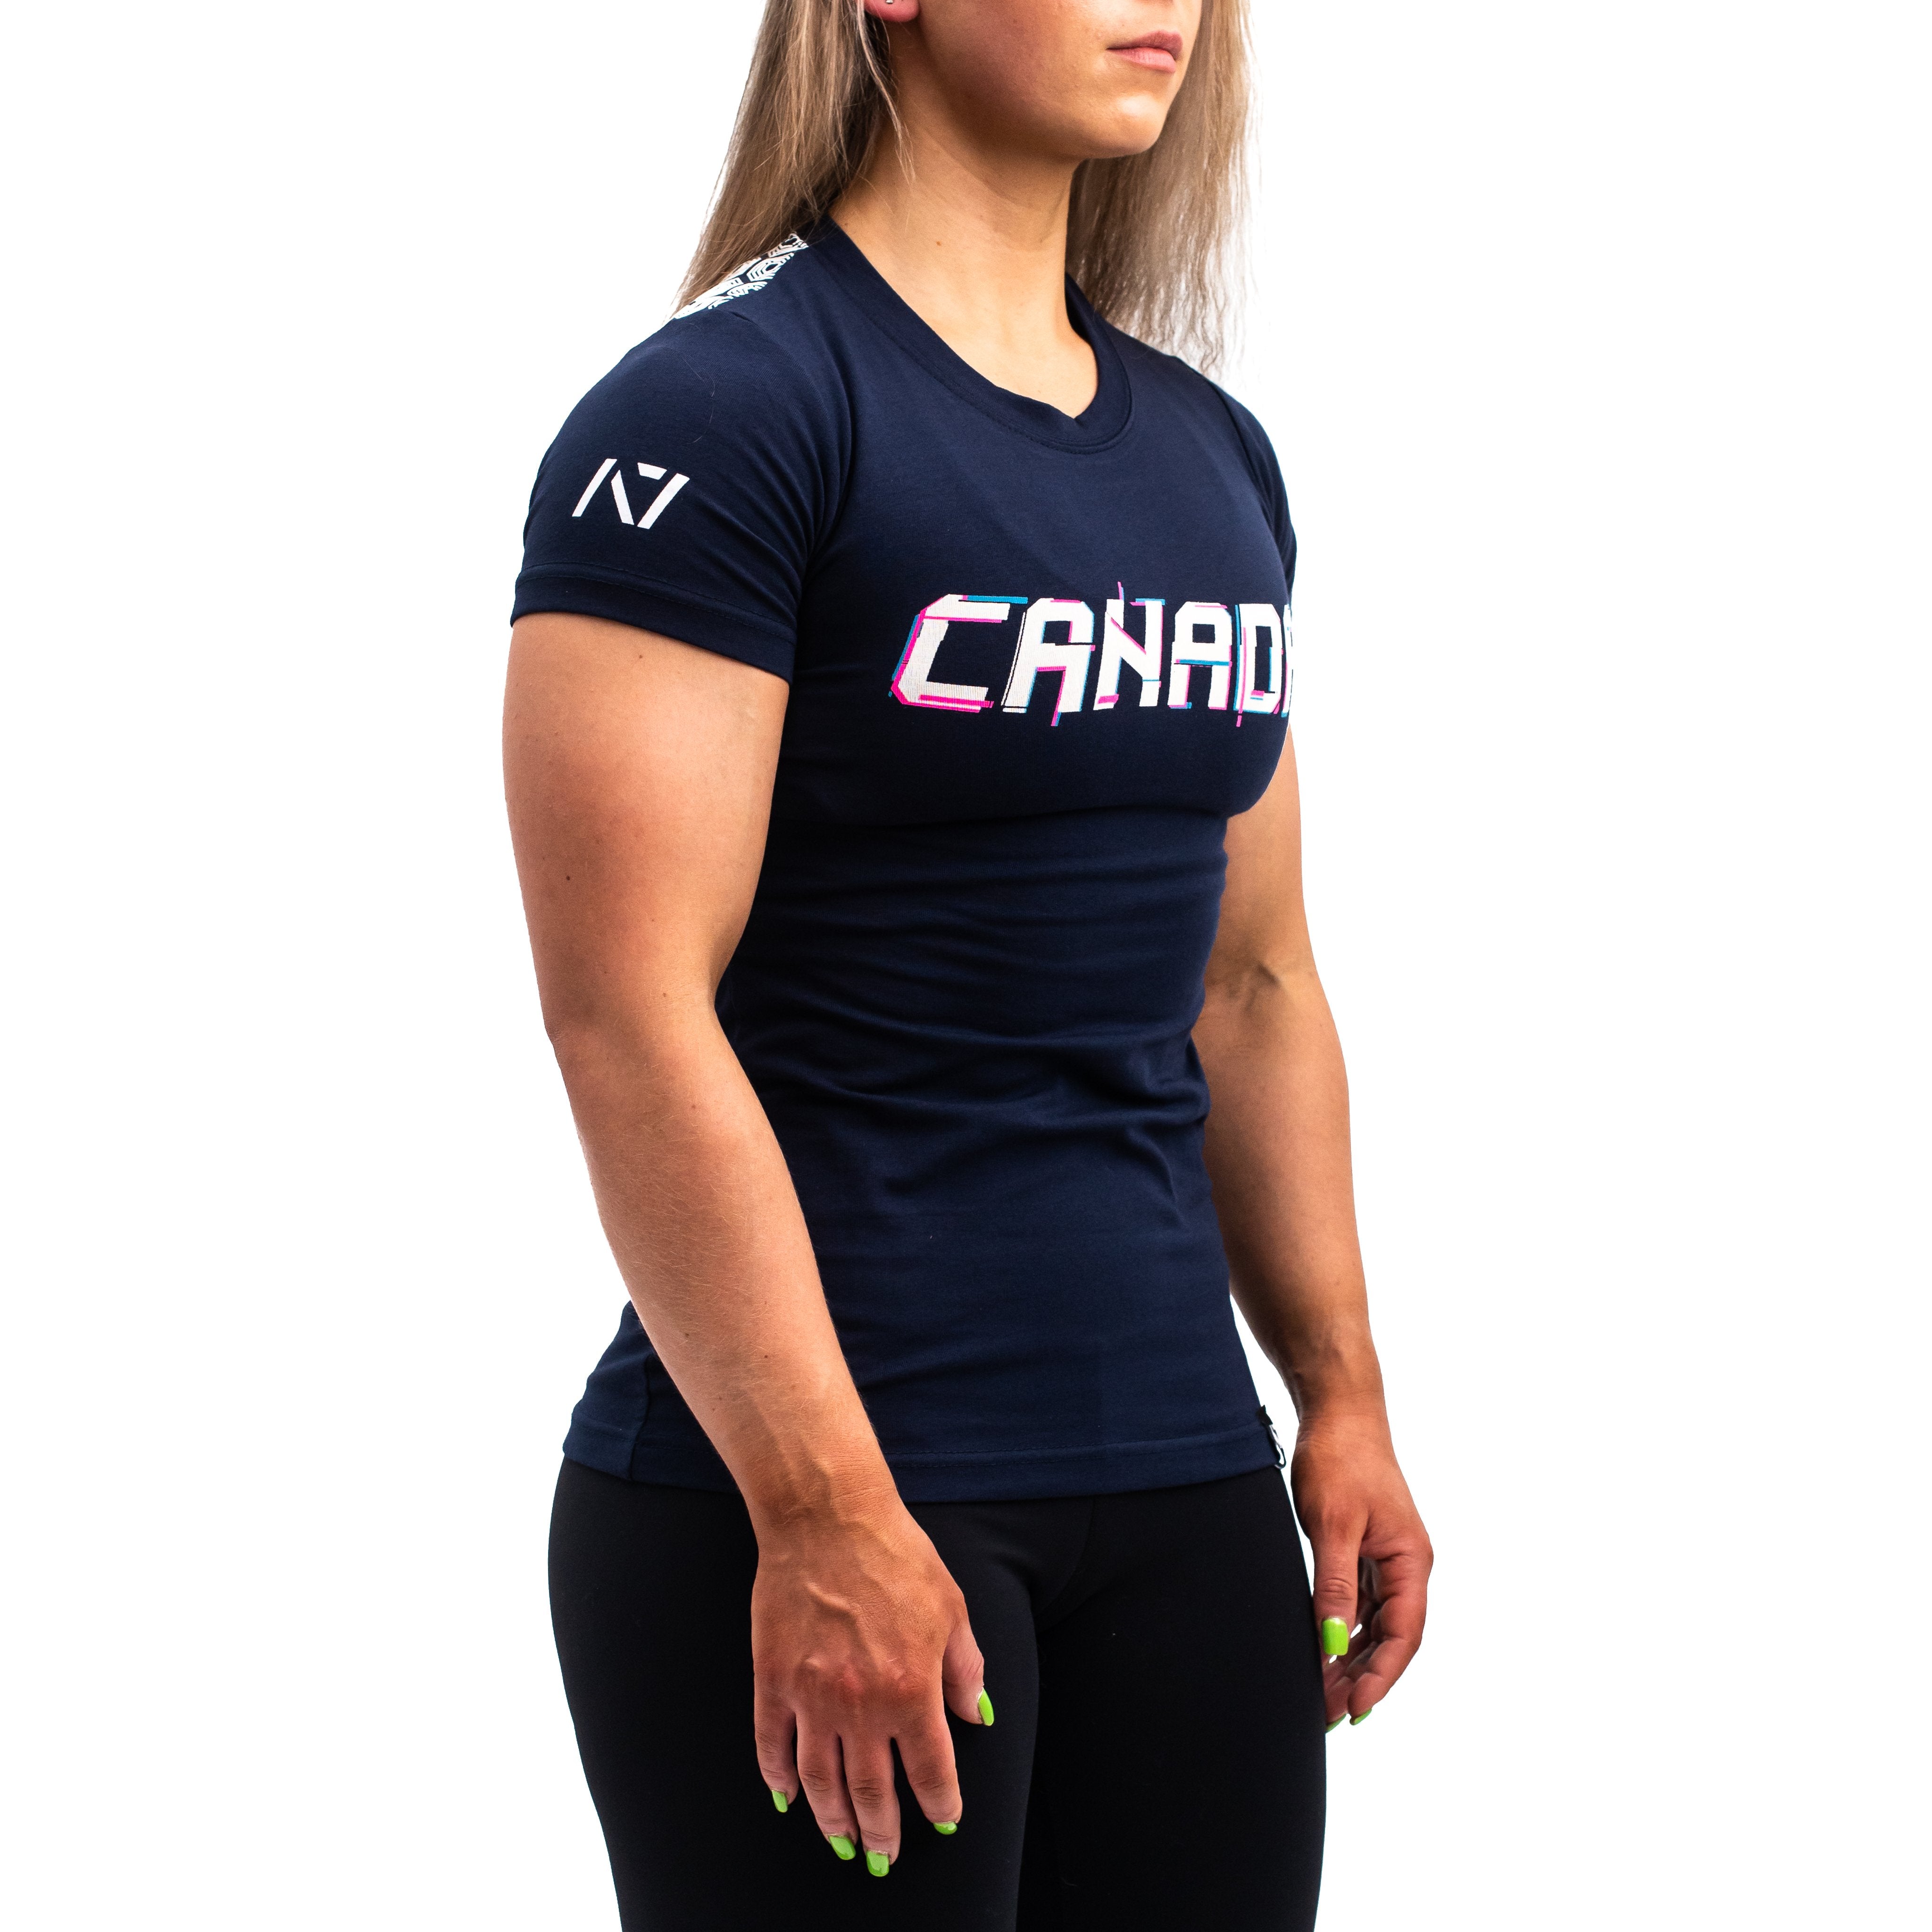 Canada Bar Grip T-shirt, great as a squat shirt. Purchase  Canada Bar Grip tshirt UK from A7 UK. Purchase Canada Bar Grip Shirt Europe from A7 UK. No more chalk and no more sliding. Best Bar Grip Tshirts, shipping to UK and Europe from A7 UK. Stealth is our classic black on black shirt design! The best Powerlifting apparel for all your workouts. Available in UK and Europe including France, Italy, Germany, Sweden and Poland